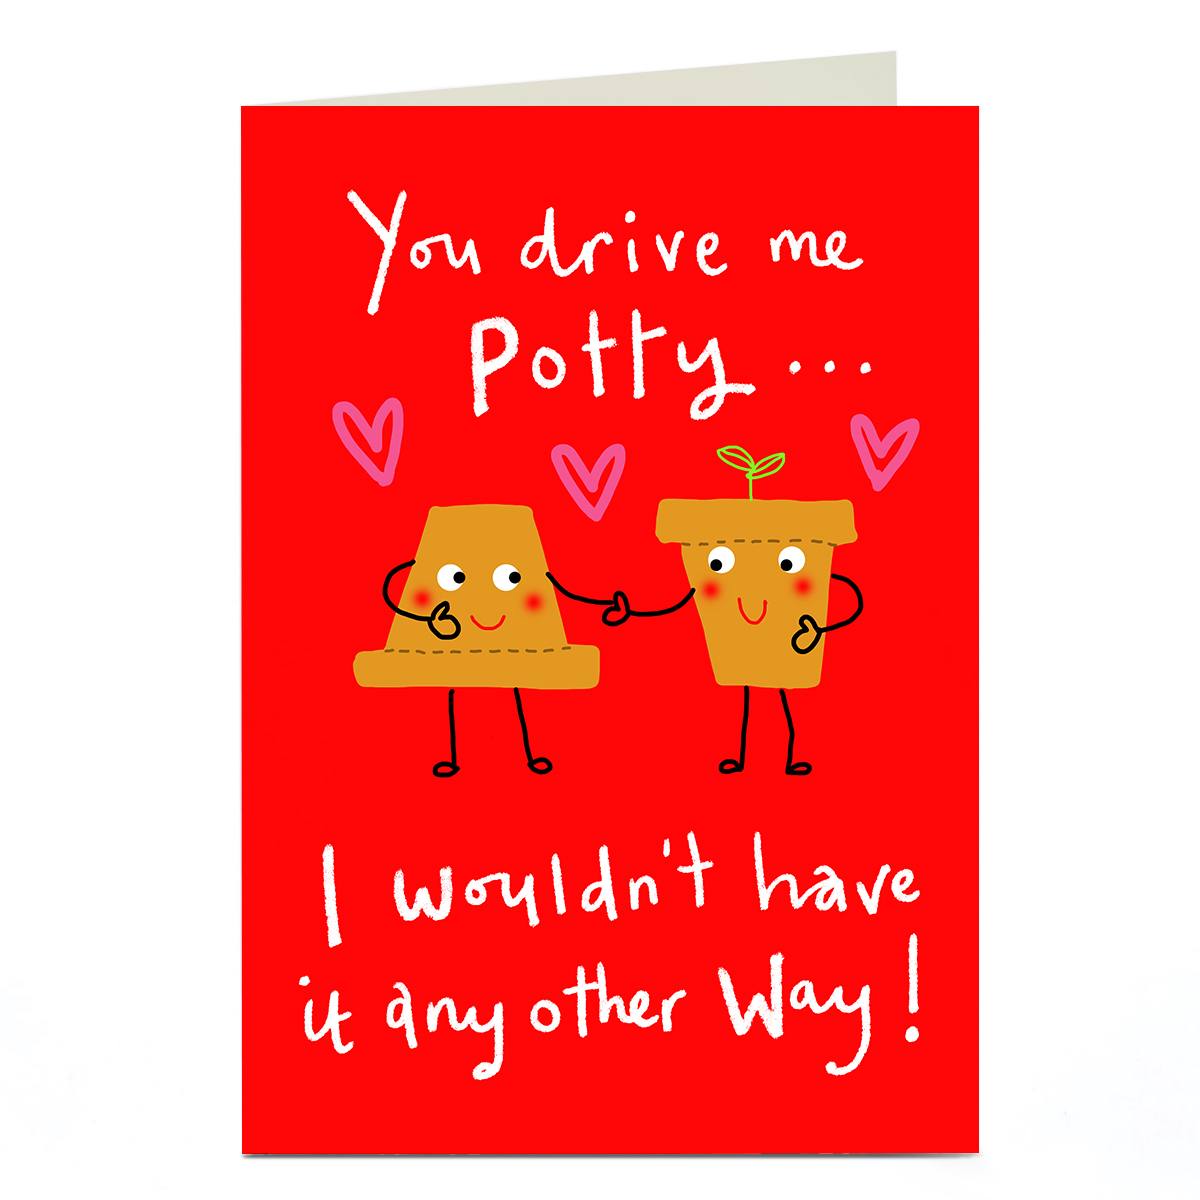 Personalised Lindsay Loves To Draw Valentine's Day Card - Potty